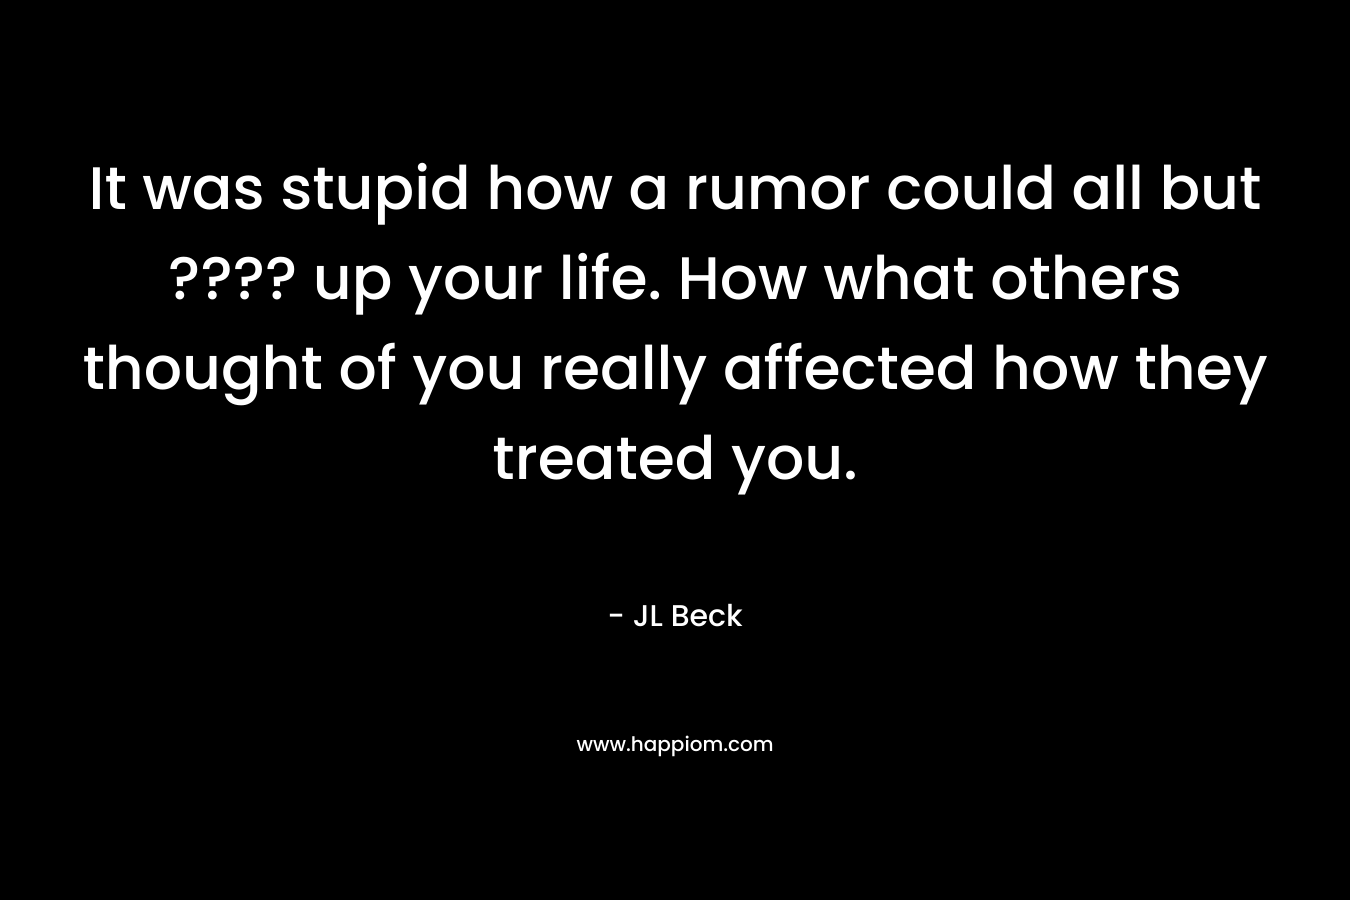 It was stupid how a rumor could all but ???? up your life. How what others thought of you really affected how they treated you. – JL Beck